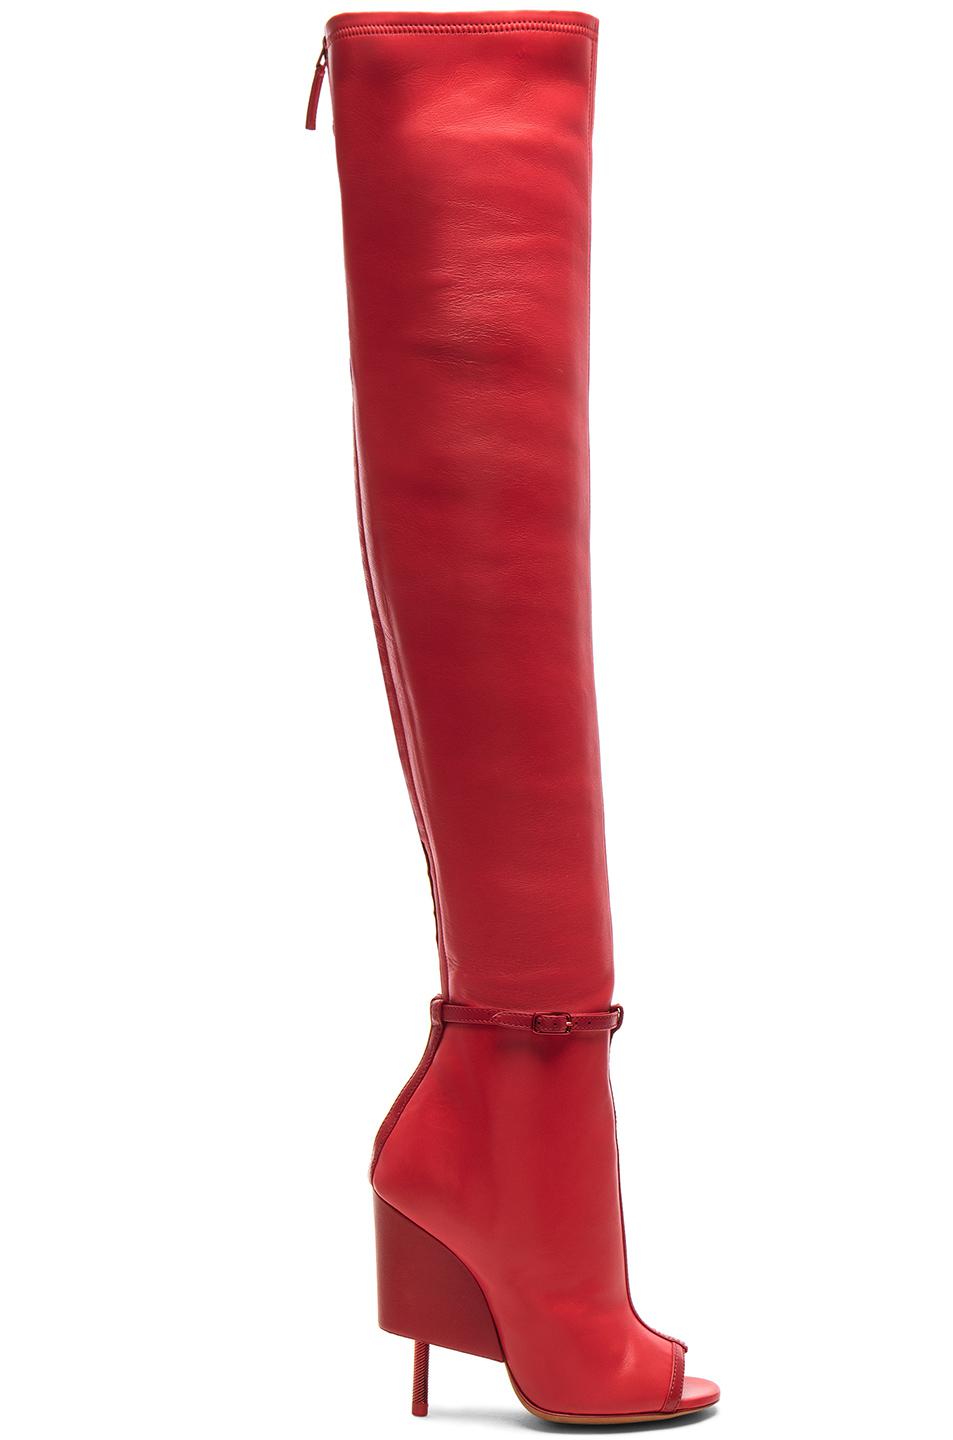 Givenchy Thigh High Open Toe Leather Boots in Red | Lyst